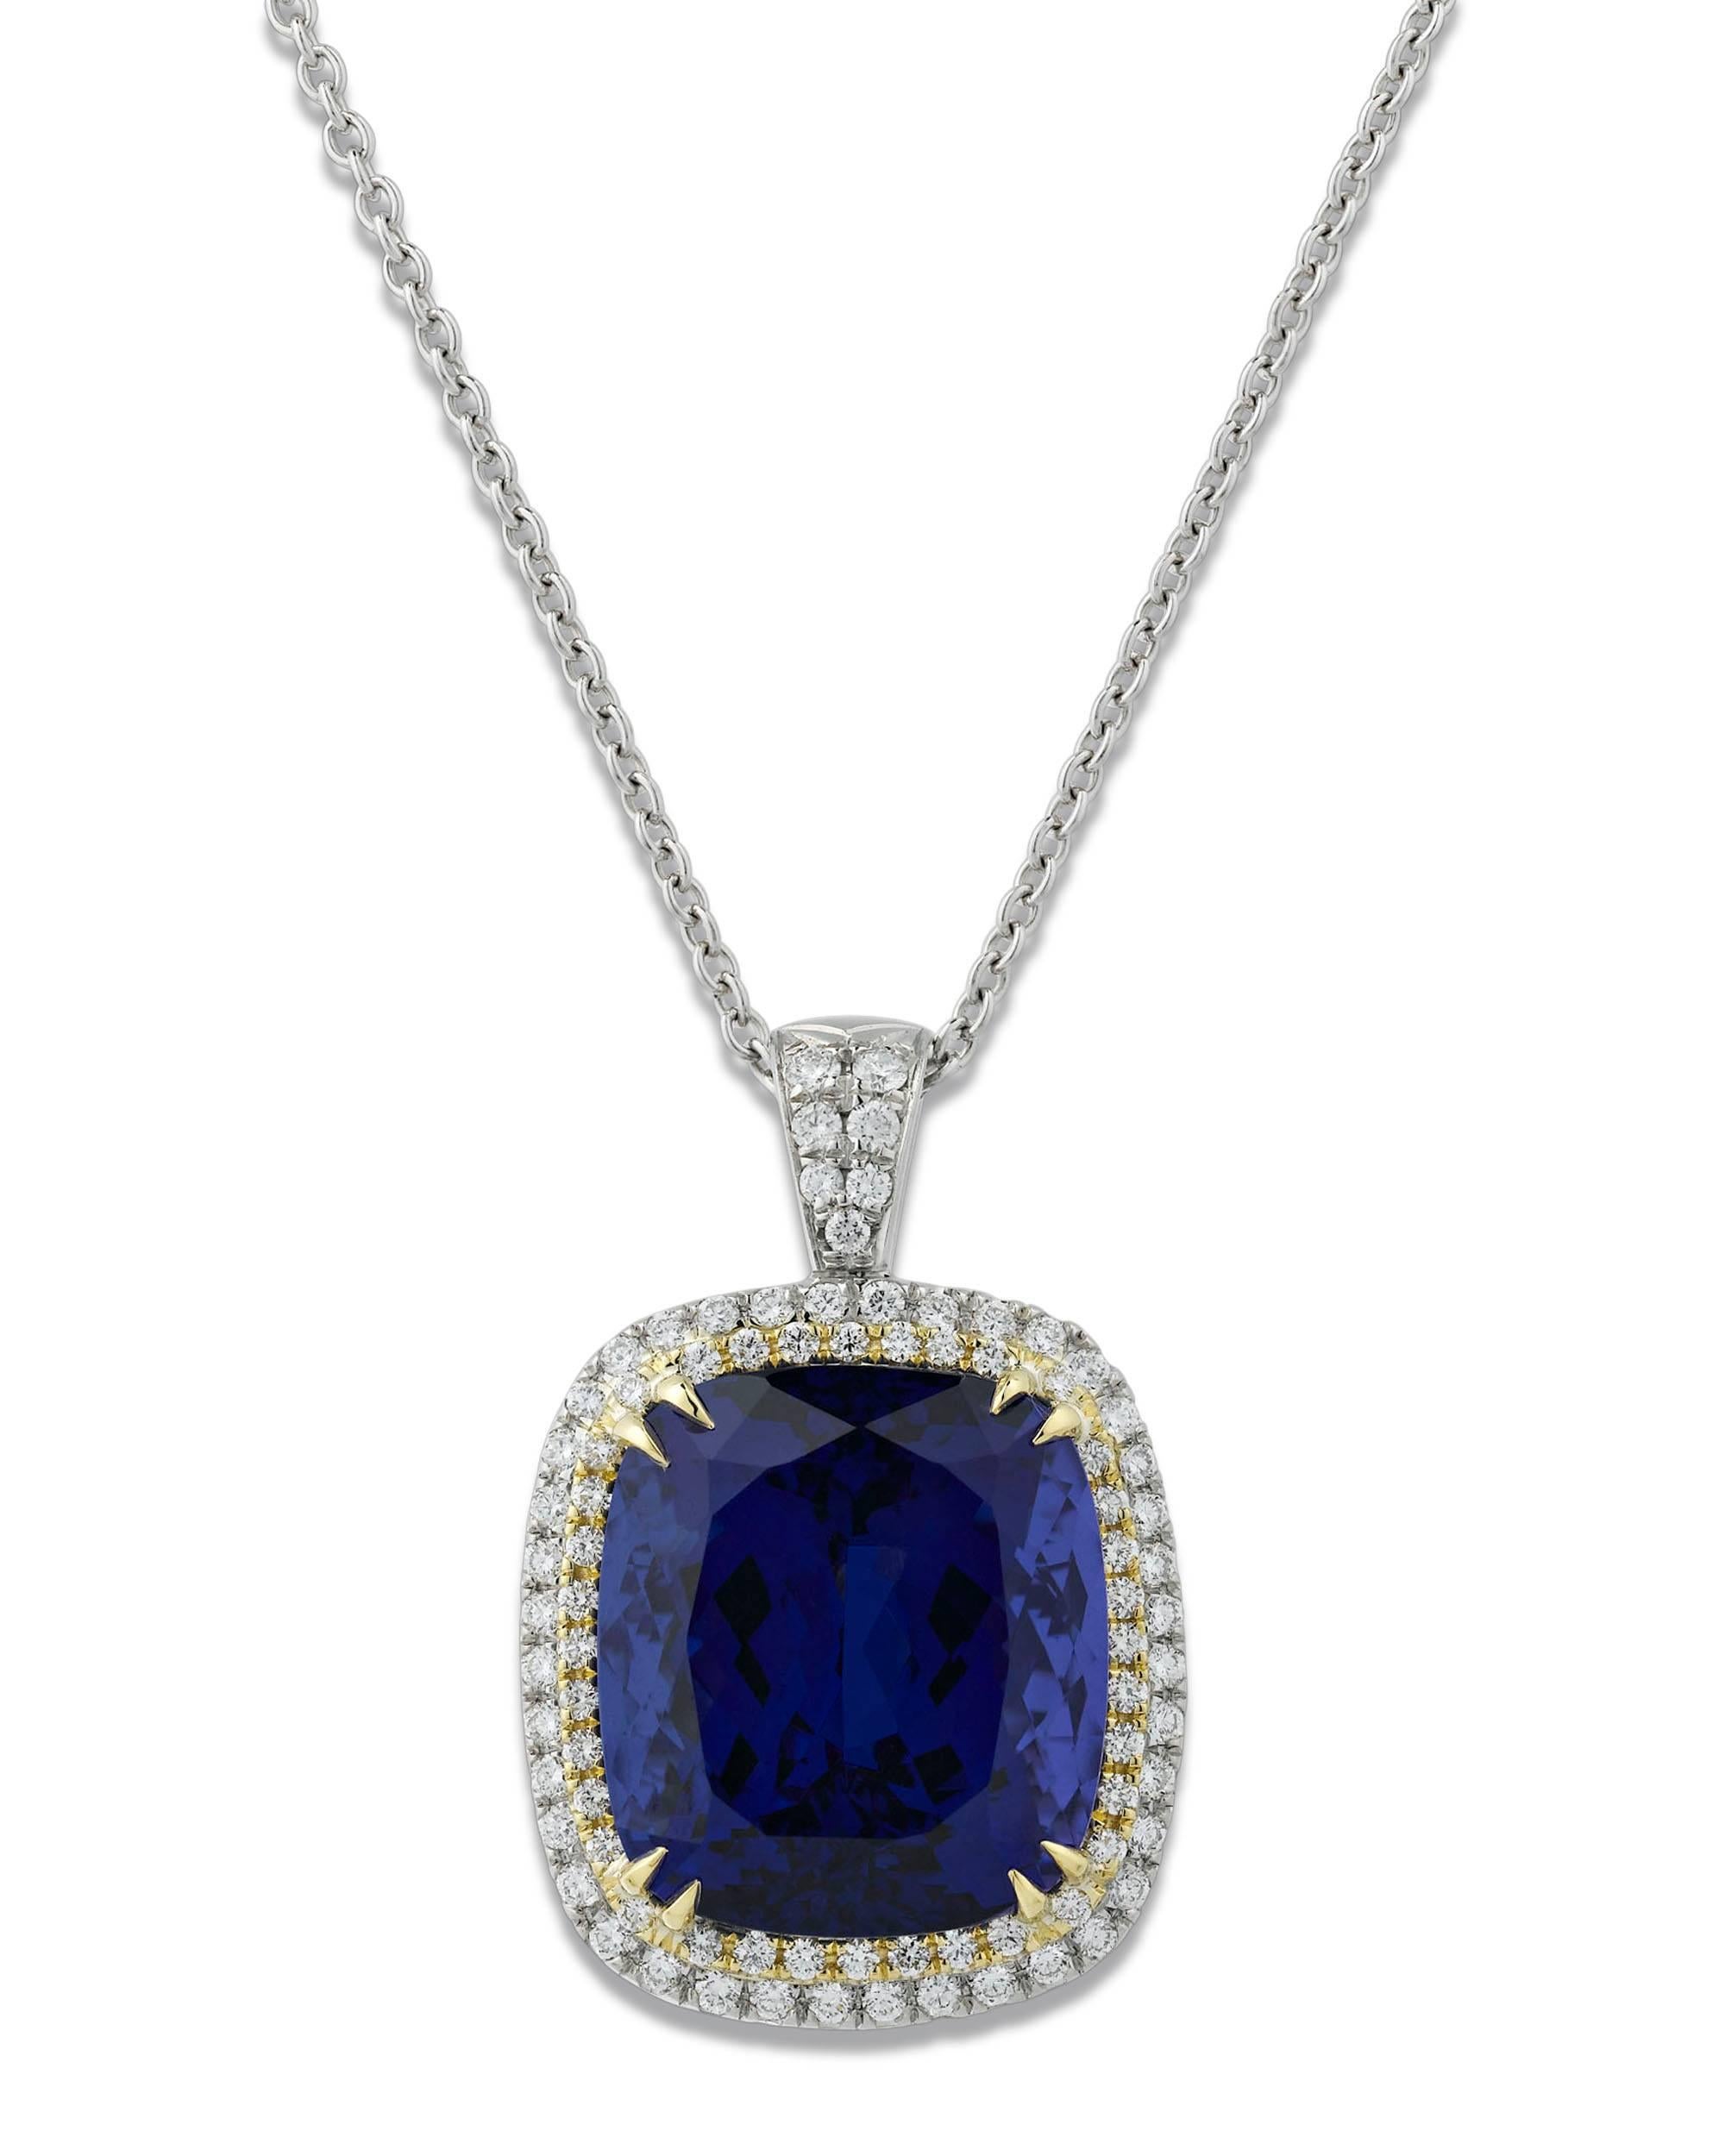 This extraordinary, untreated 24.16-carat tanzanite is truly an extraordinary gemstone. Encircled by 0.99 total carats of shimmering white diamonds, this brilliant cushion-cut gem exhibits the rich violetish-blue color for which these stones are